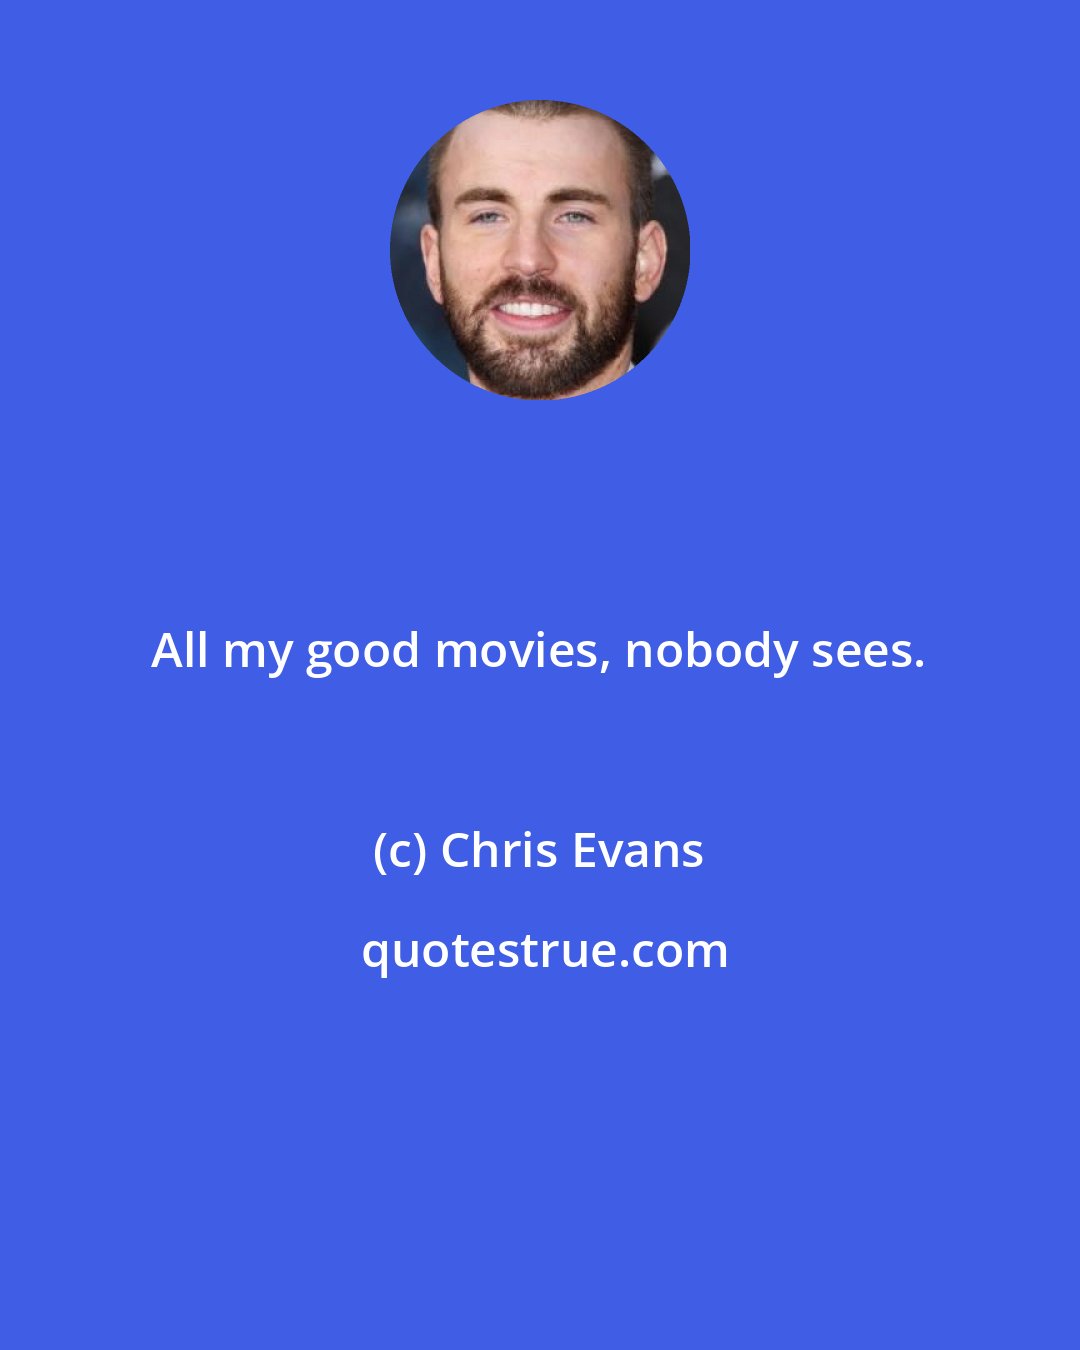 Chris Evans: All my good movies, nobody sees.